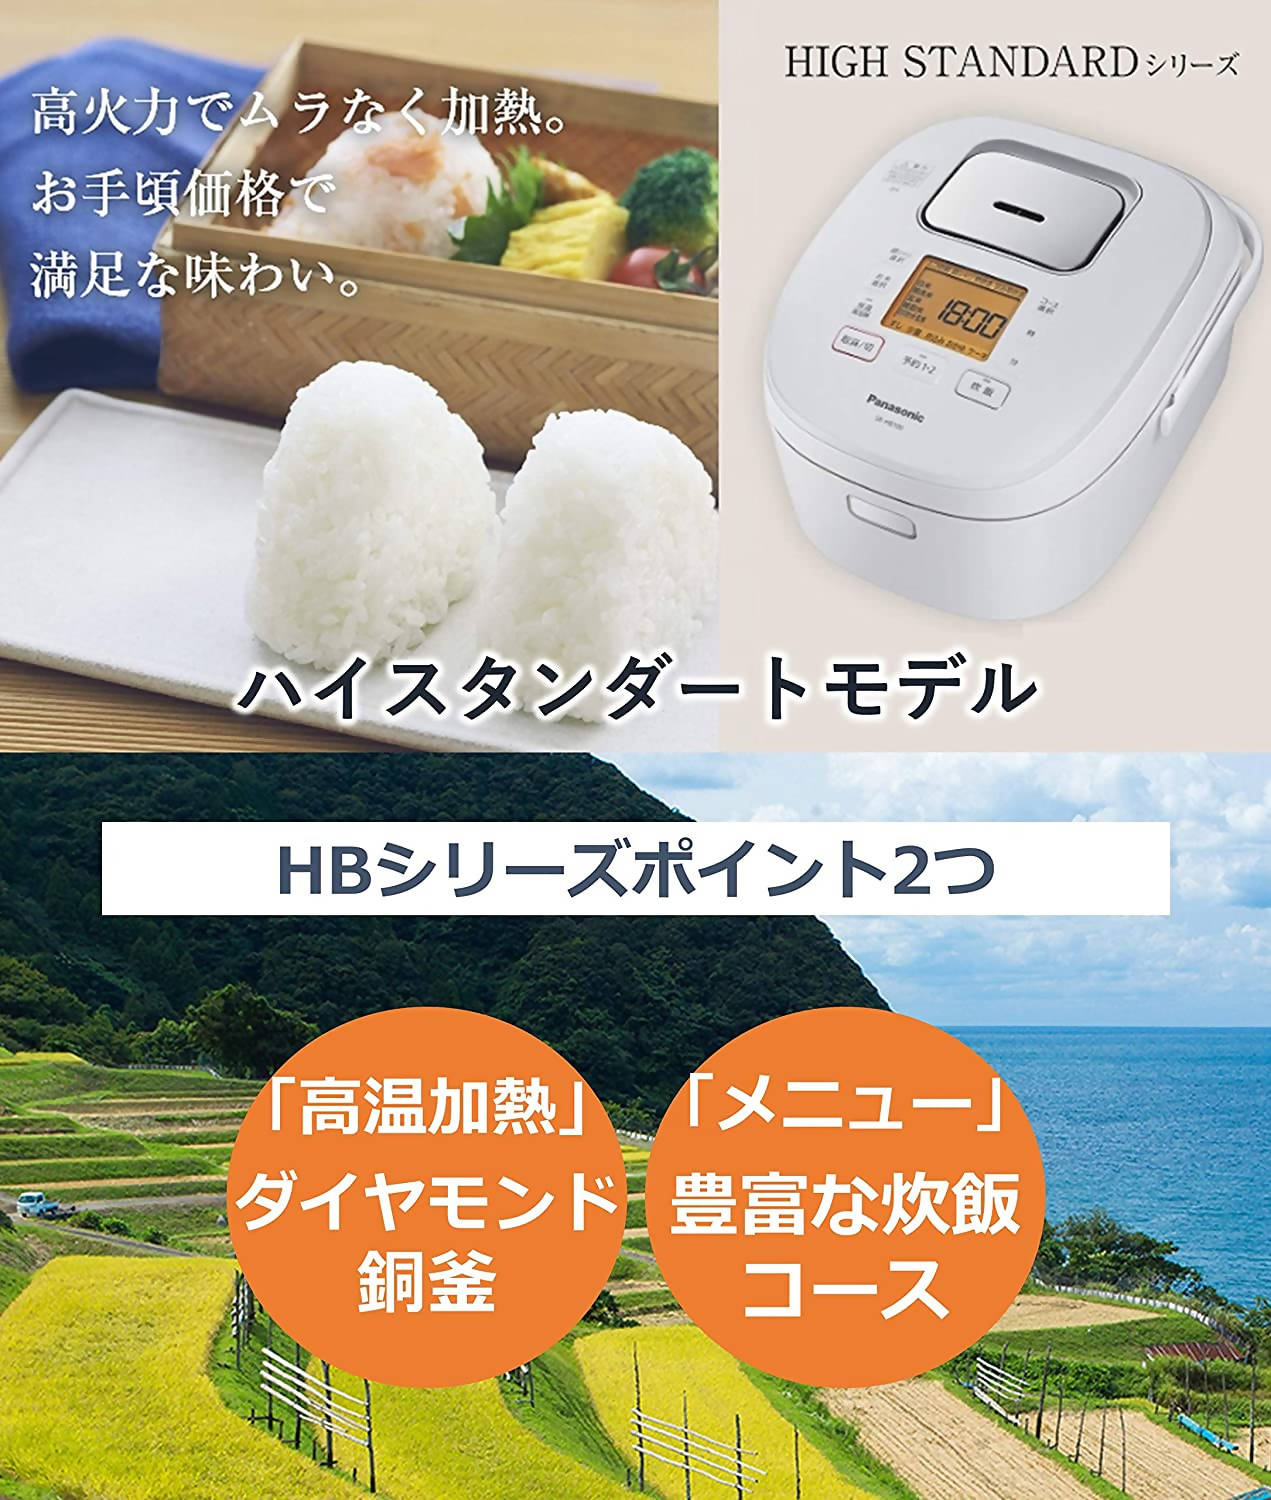 Panasonic SR-HB100-W 5-Stage IH (Induction Heating) Rice Cooker